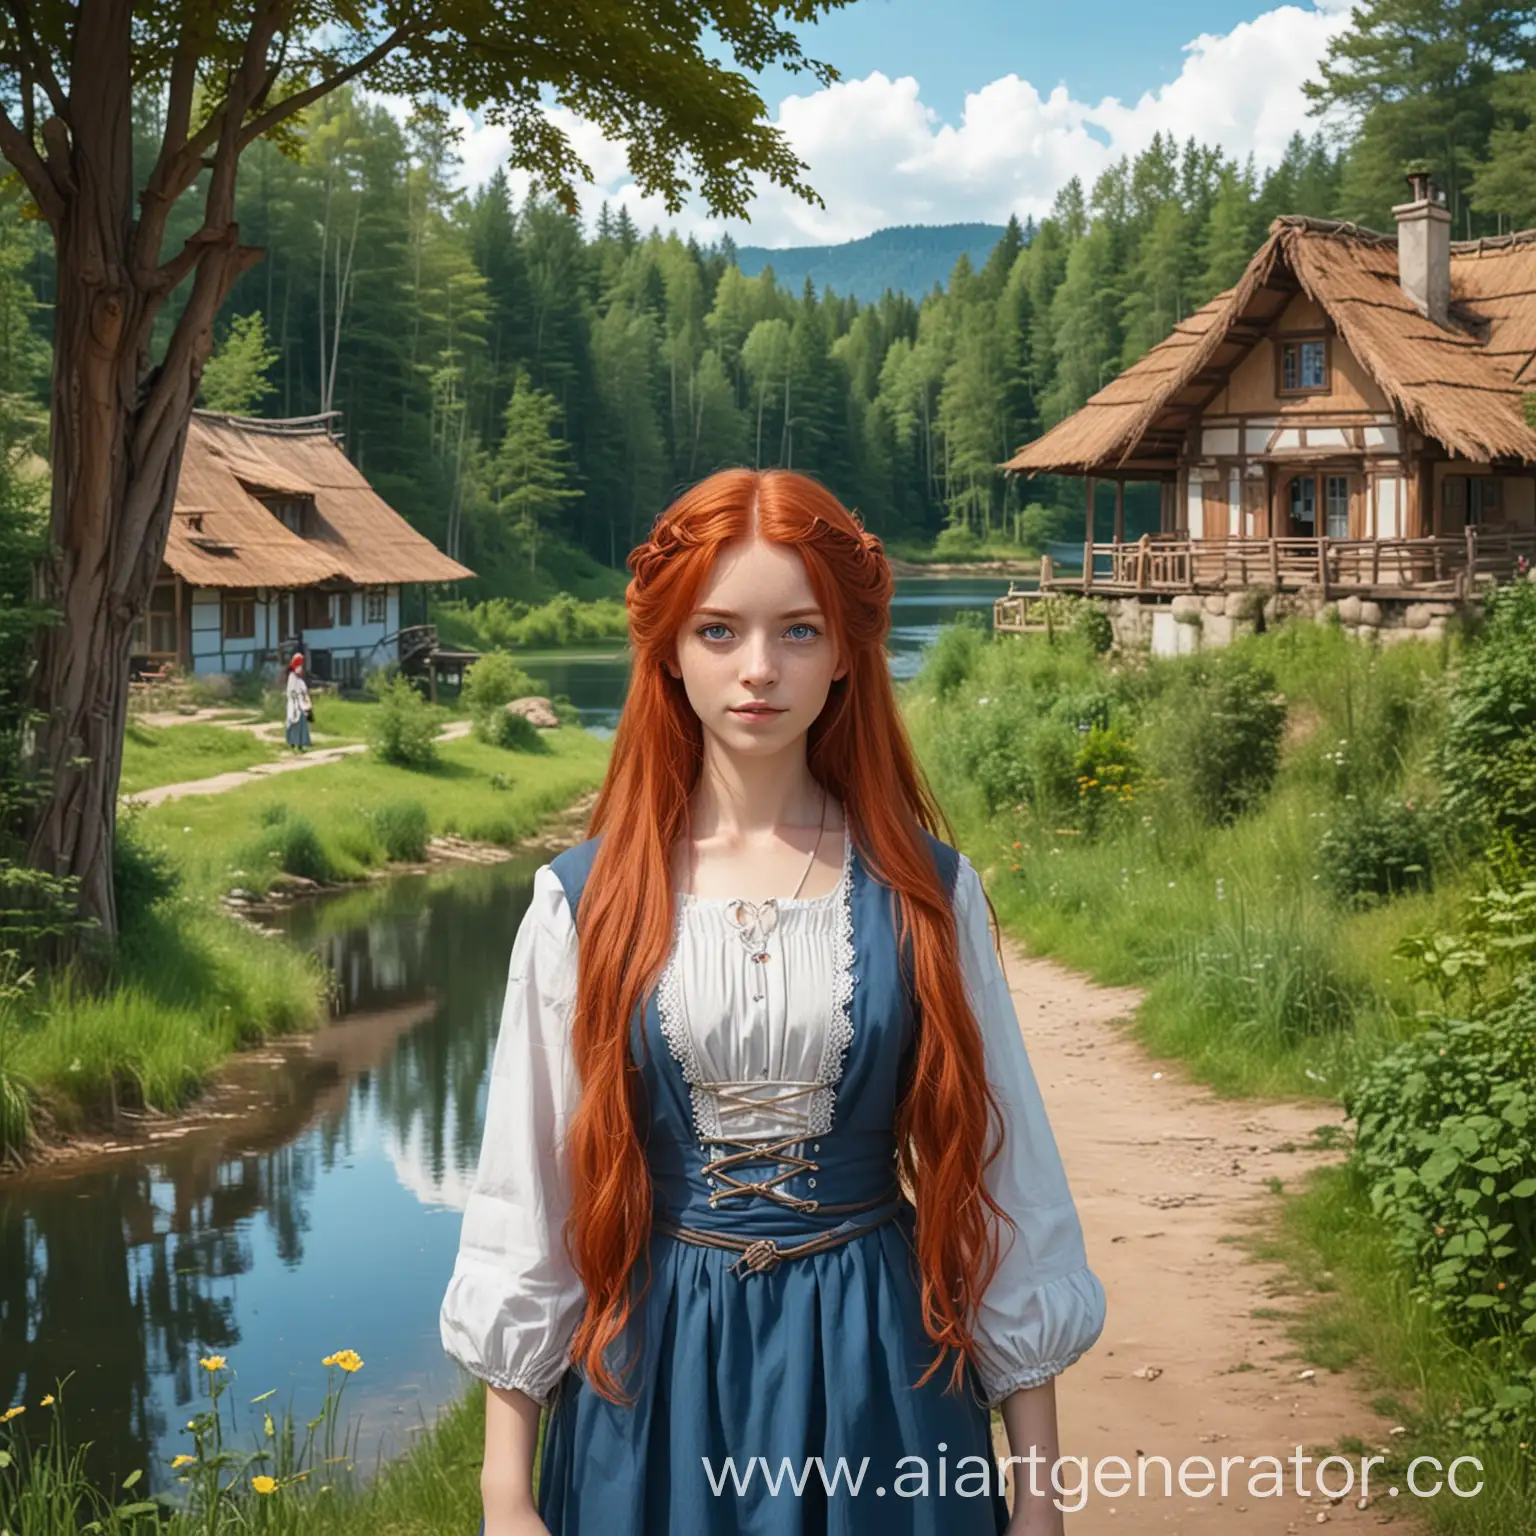 RedHaired-Peasant-Woman-Walking-to-Lakeside-Cottage-Through-Dense-Forest